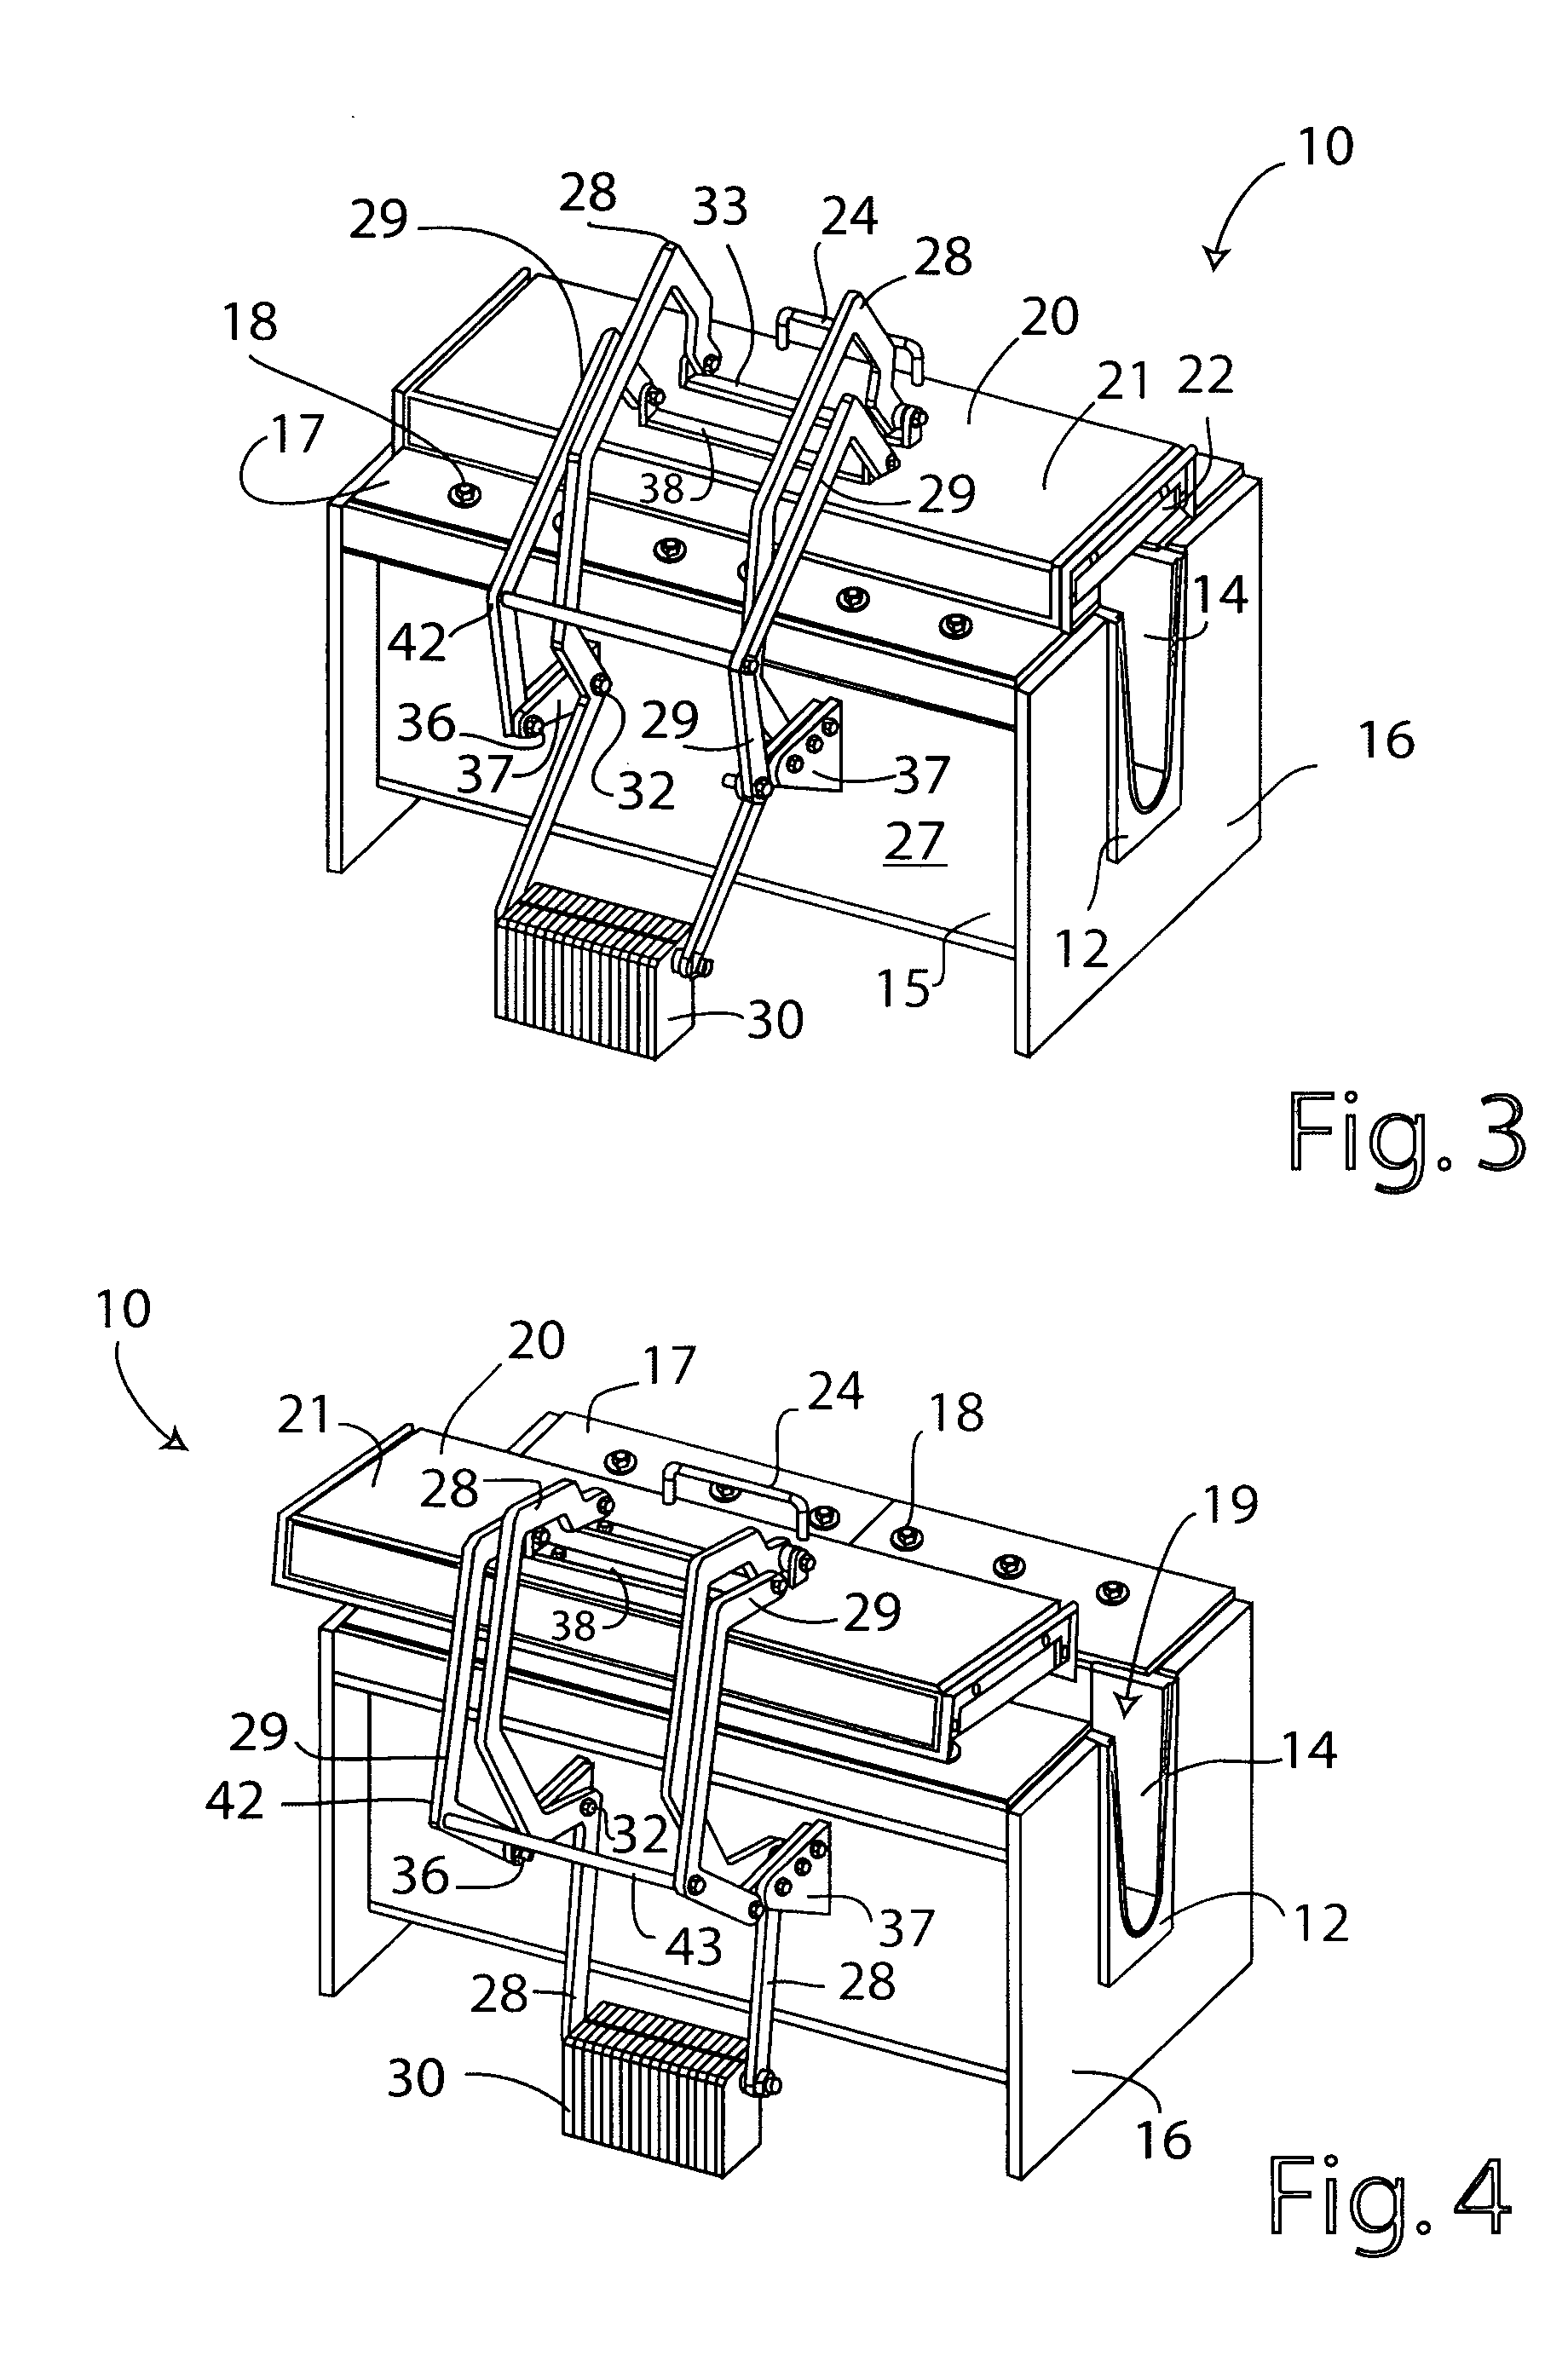 Molten metal containment structure having movable cover